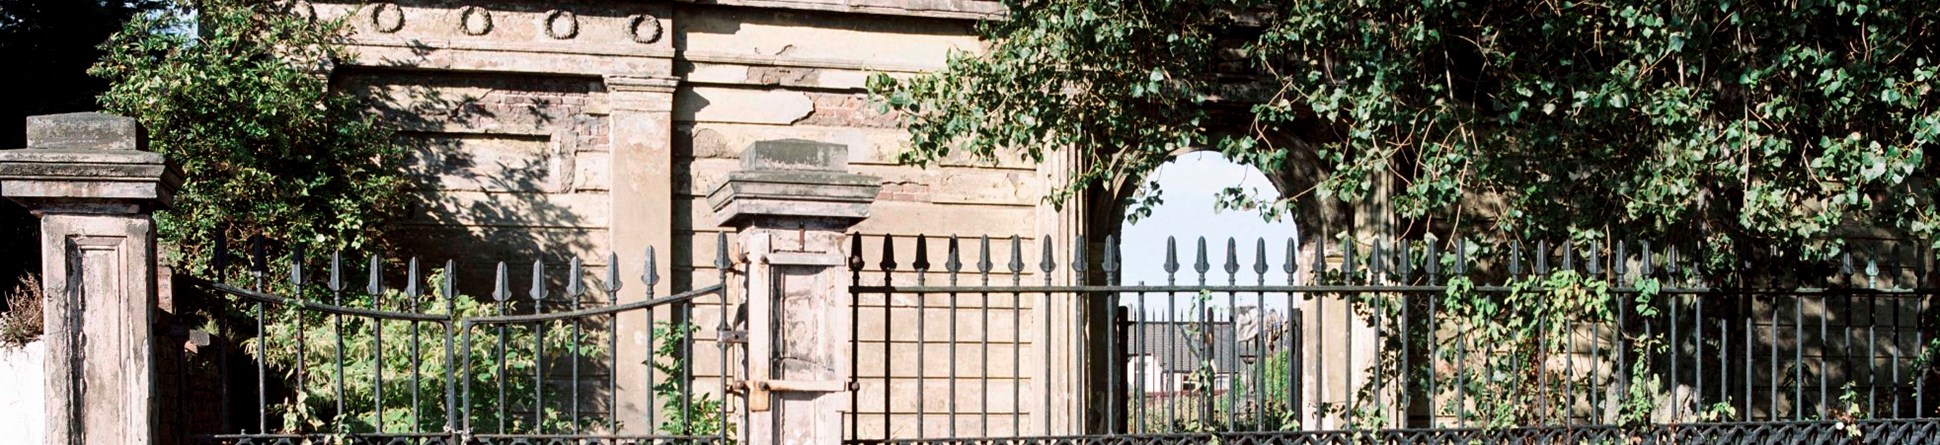 Exterior view of Jewish cemetery screen with front railings, Deane Road cemetery, Merseyside, Liverpool